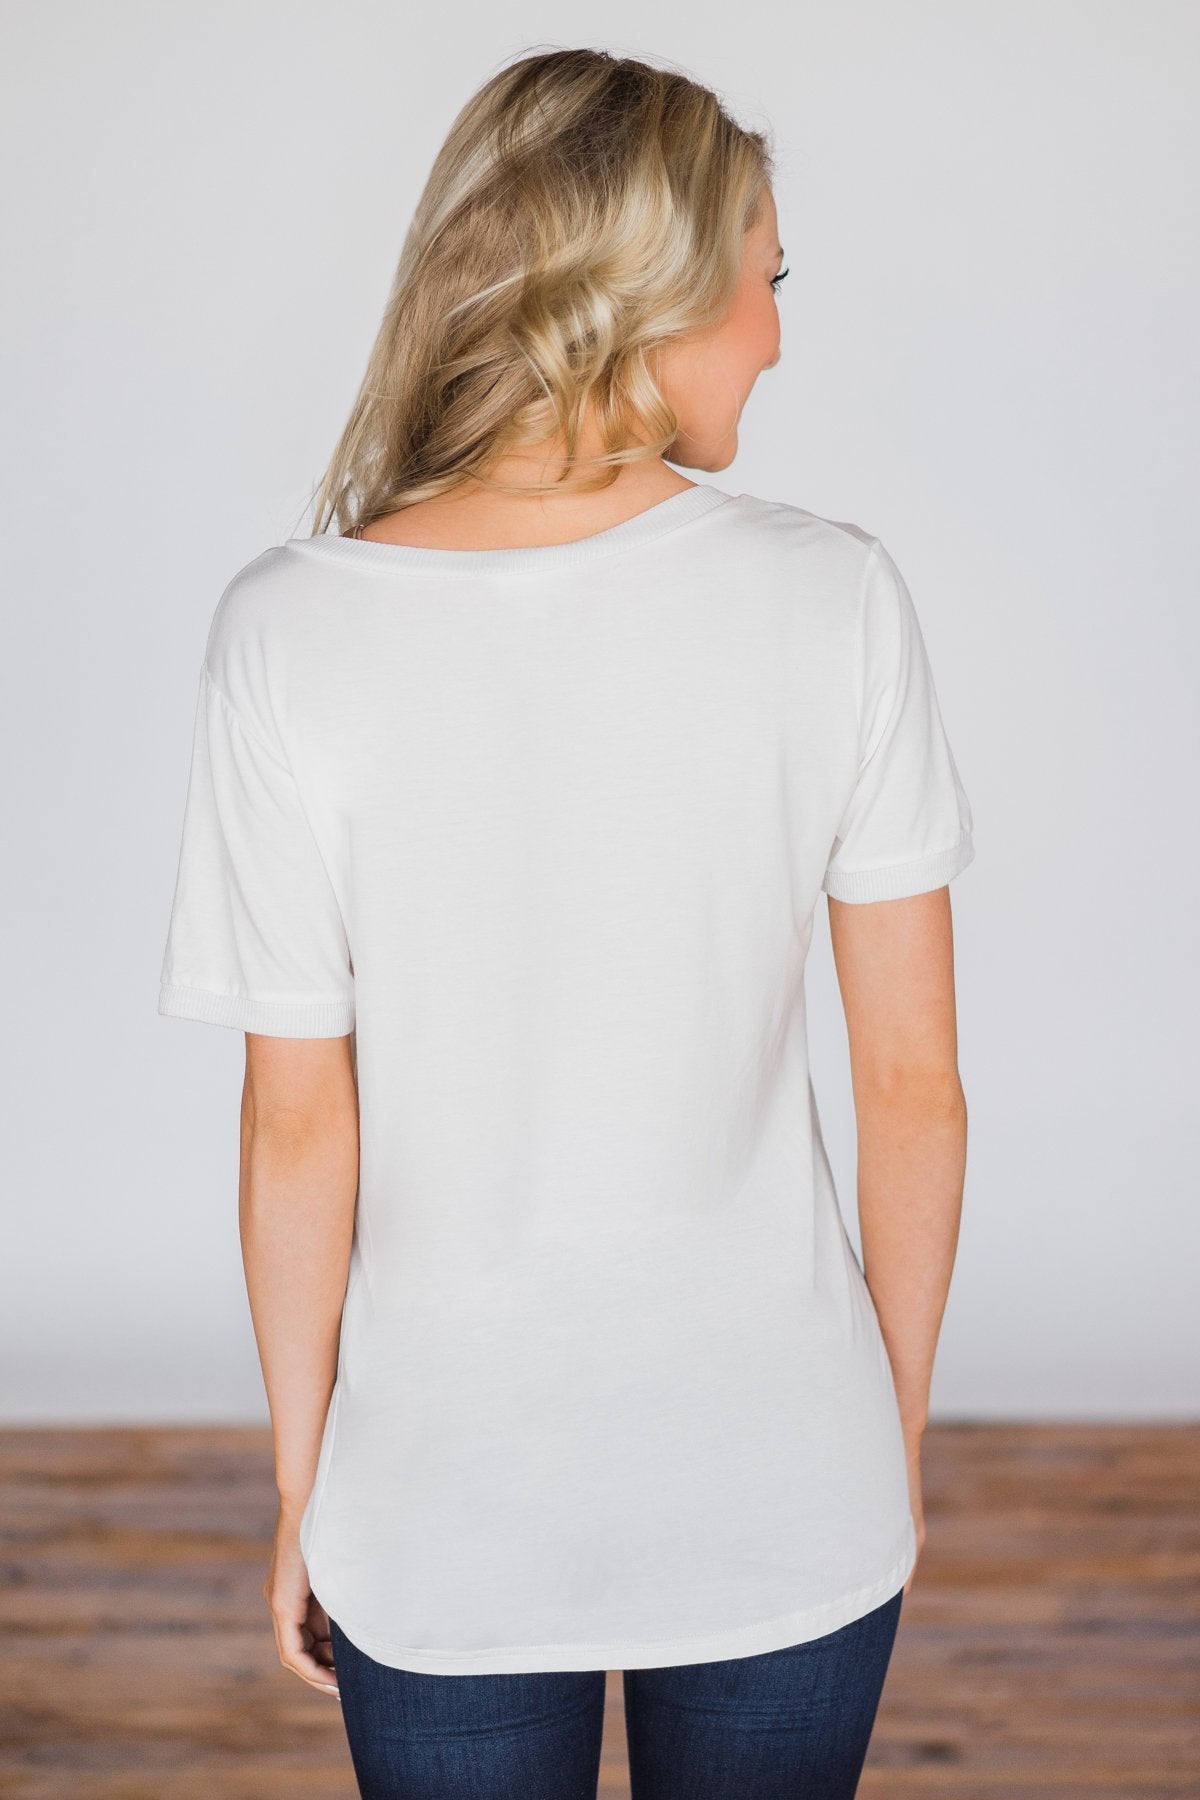 Unconditional Love Pocket Top- White